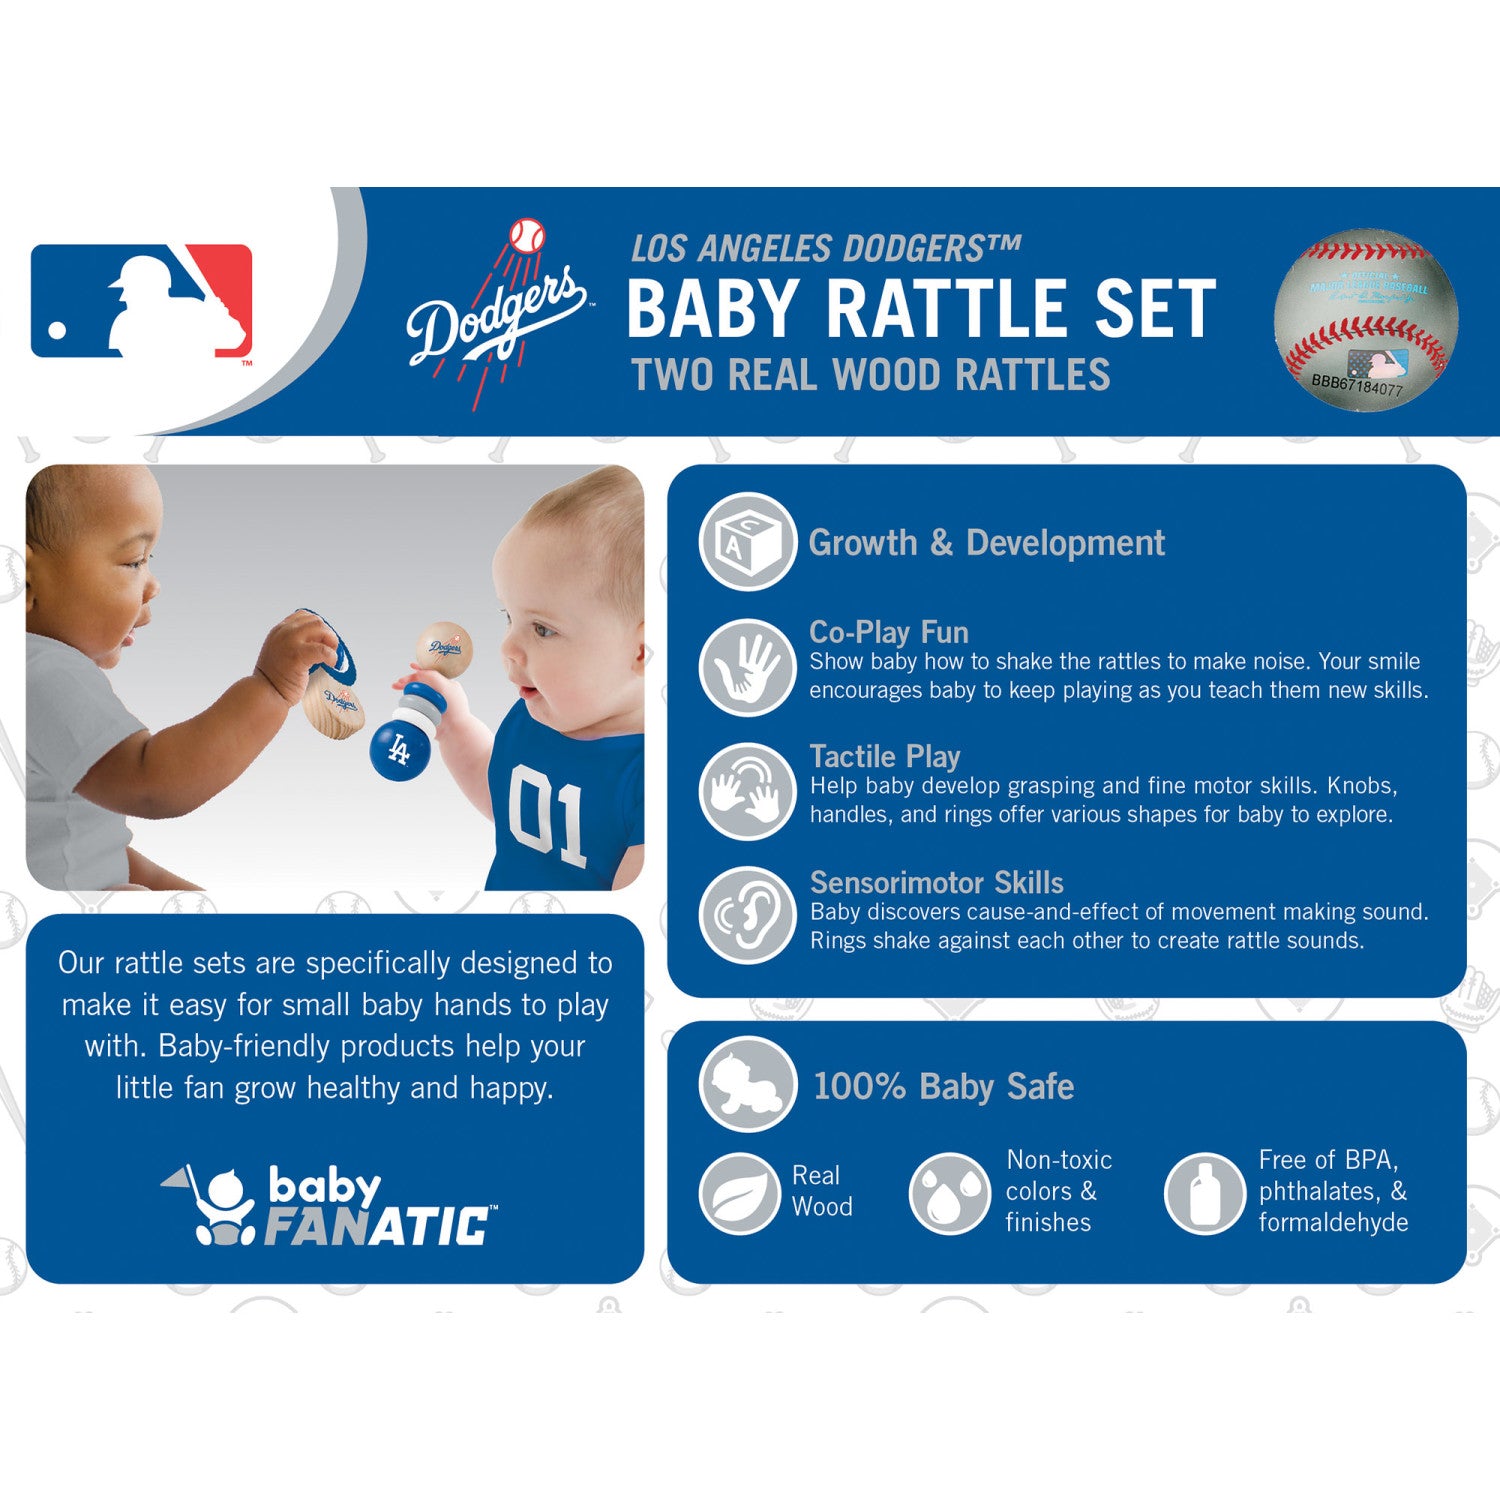 Los Angeles Dodgers - Baby Rattles 2-Pack